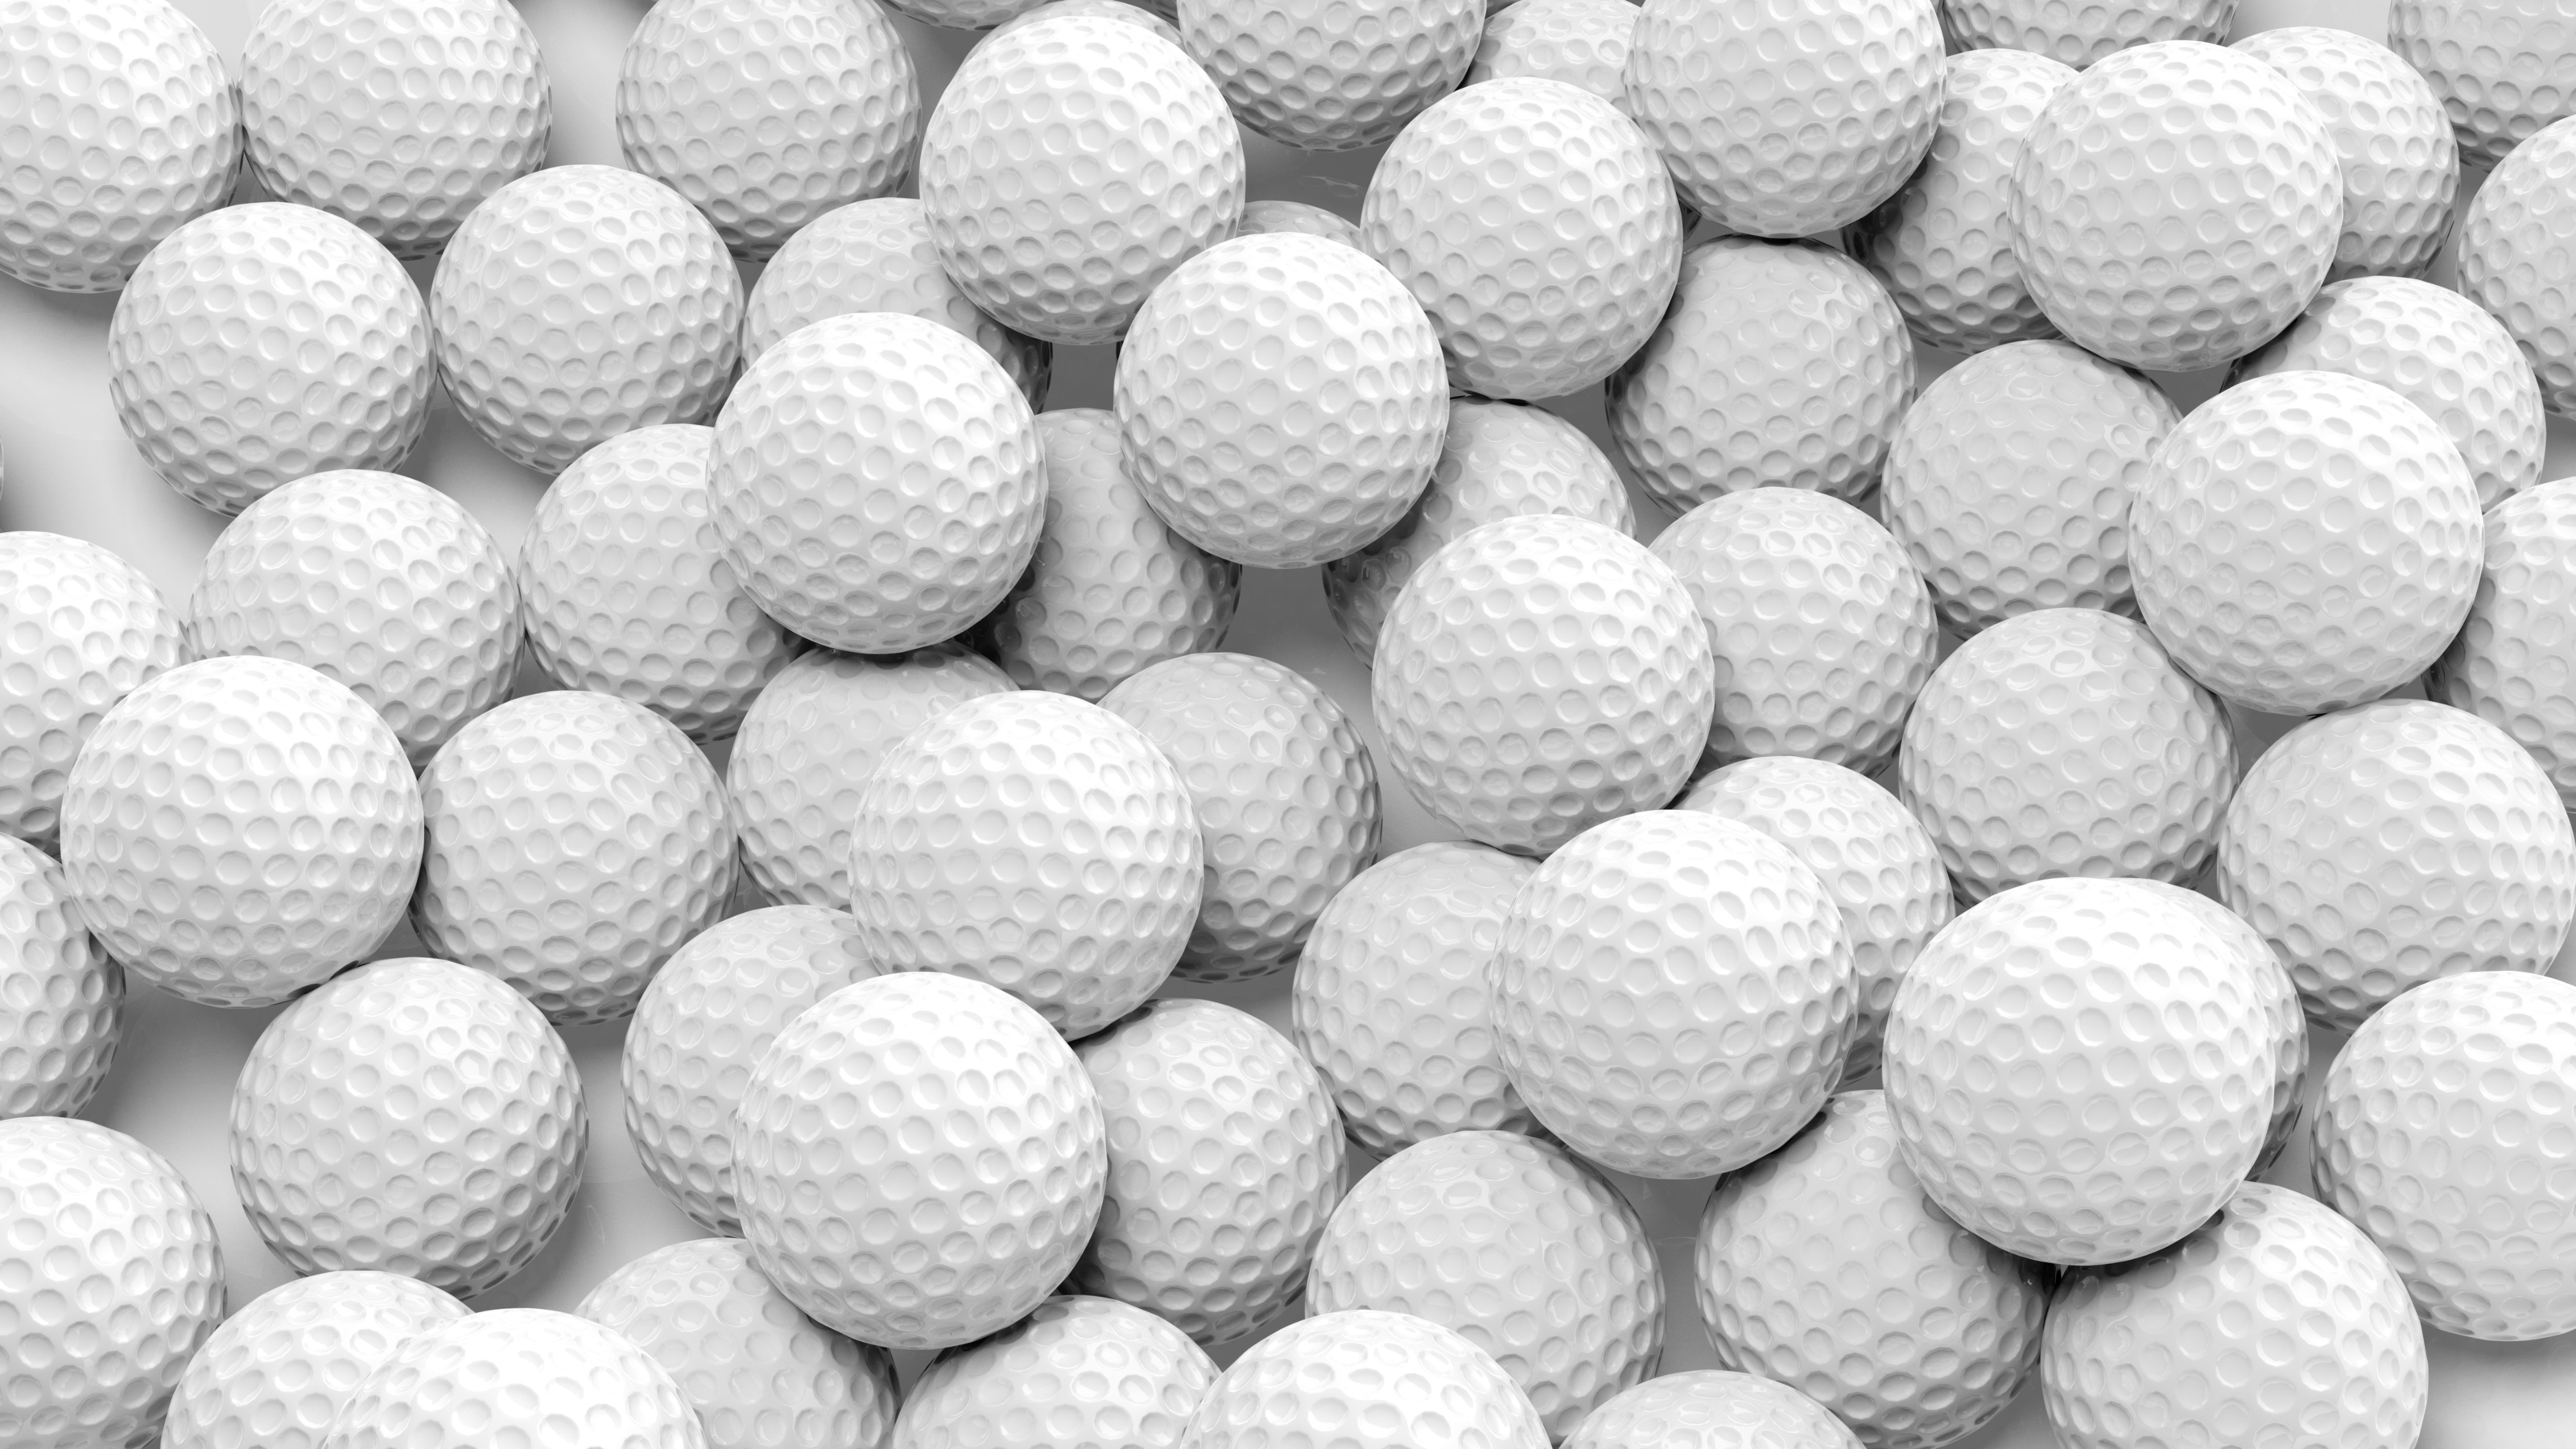 Golf Ball Photos Download The BEST Free Golf Ball Stock Photos  HD Images